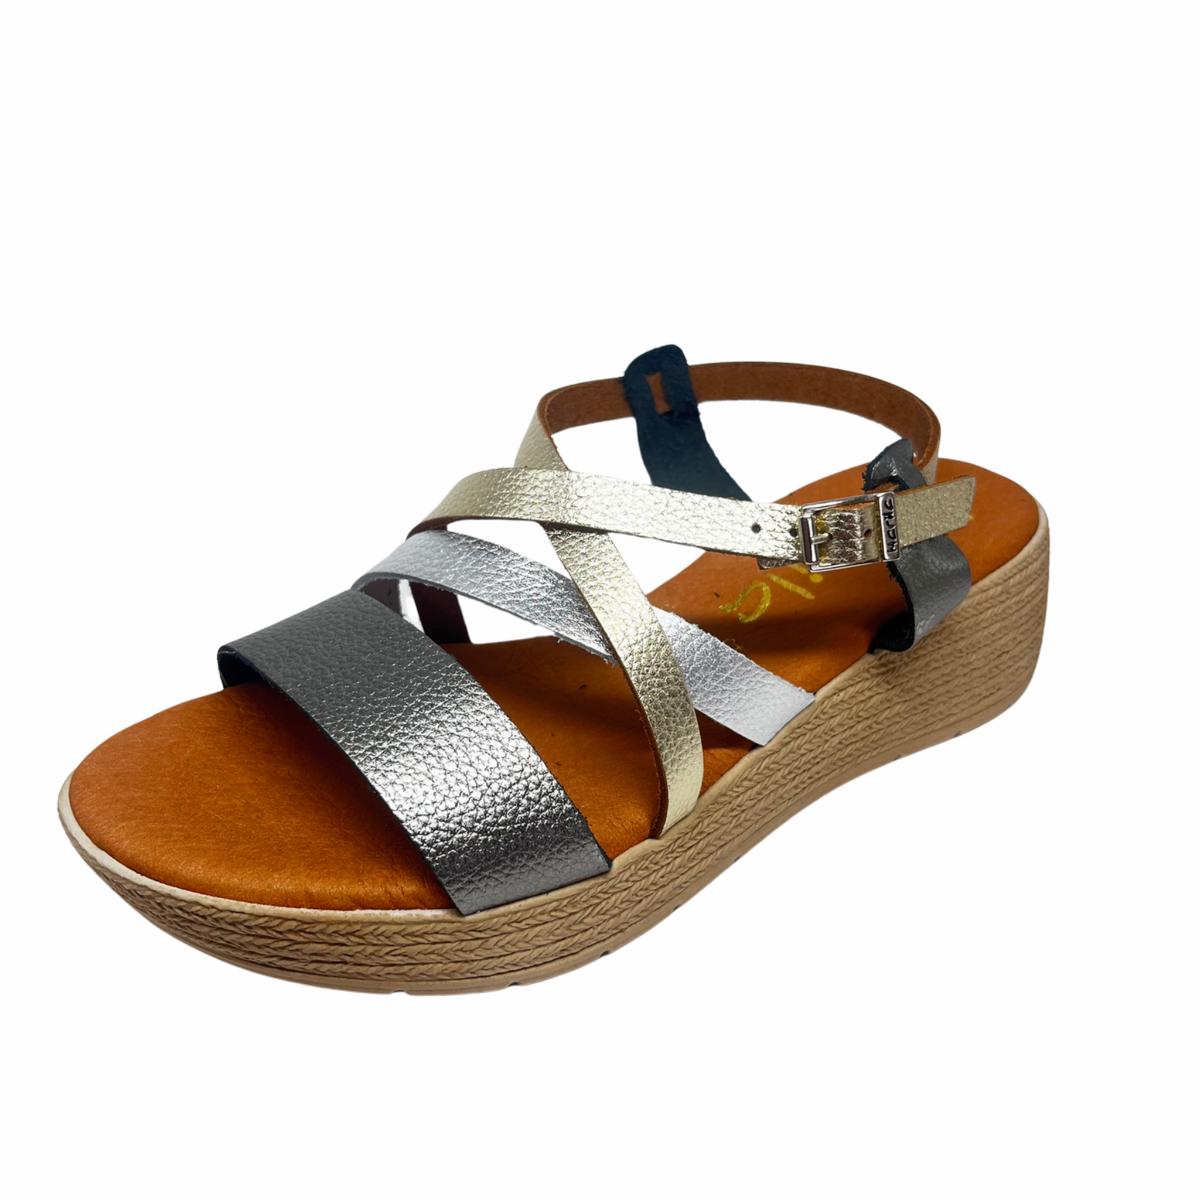 Marila Wedge Leather Sandal With Metallic Strap Details